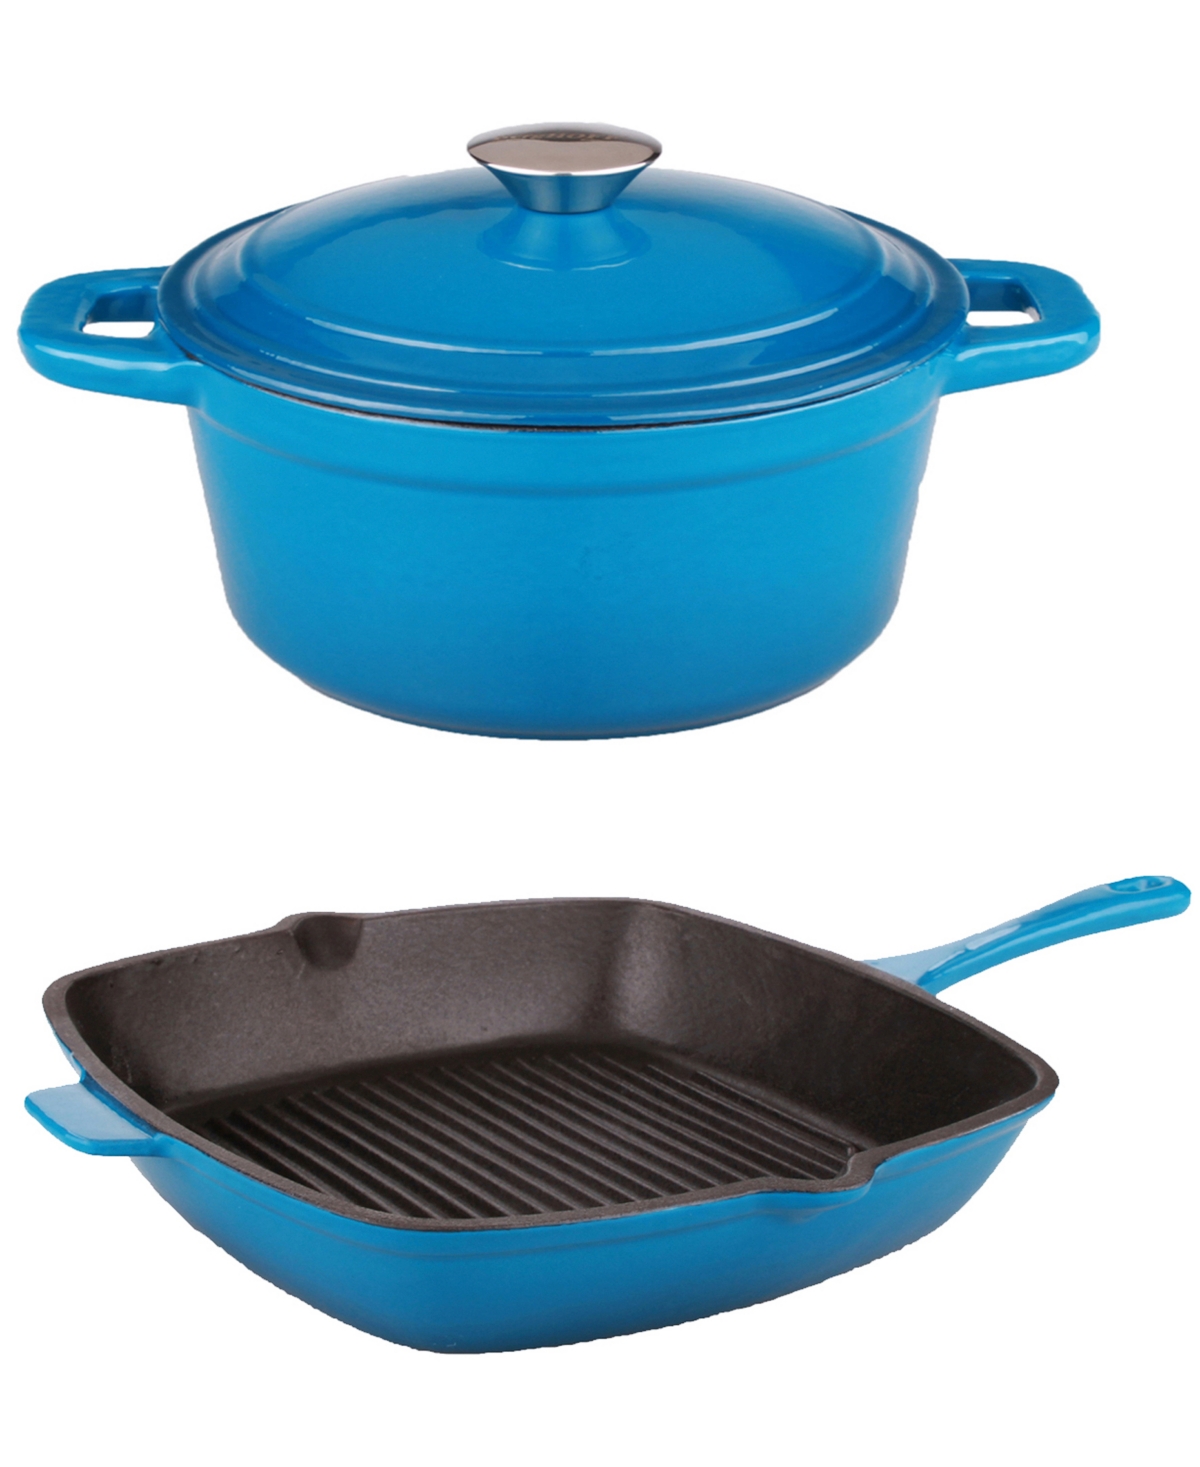 BergHoff Neo 3-Pc. Cast Iron Set: 3-Qt. Covered Dutch Oven and 11" Grill Pan